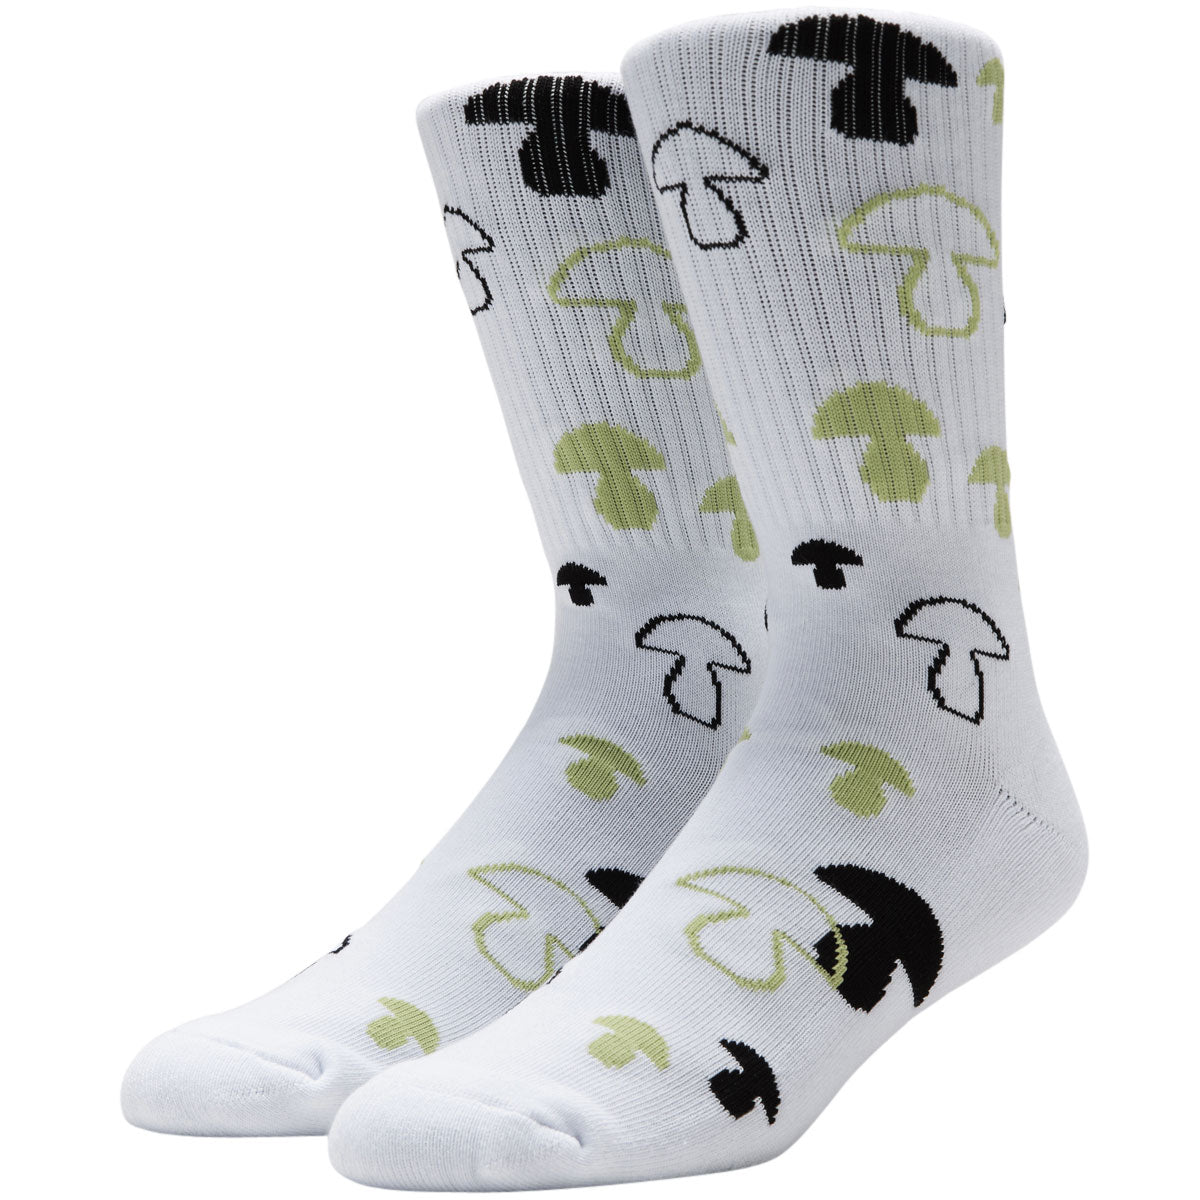 The Quiet Life Sound of Silence Socks - White image 1